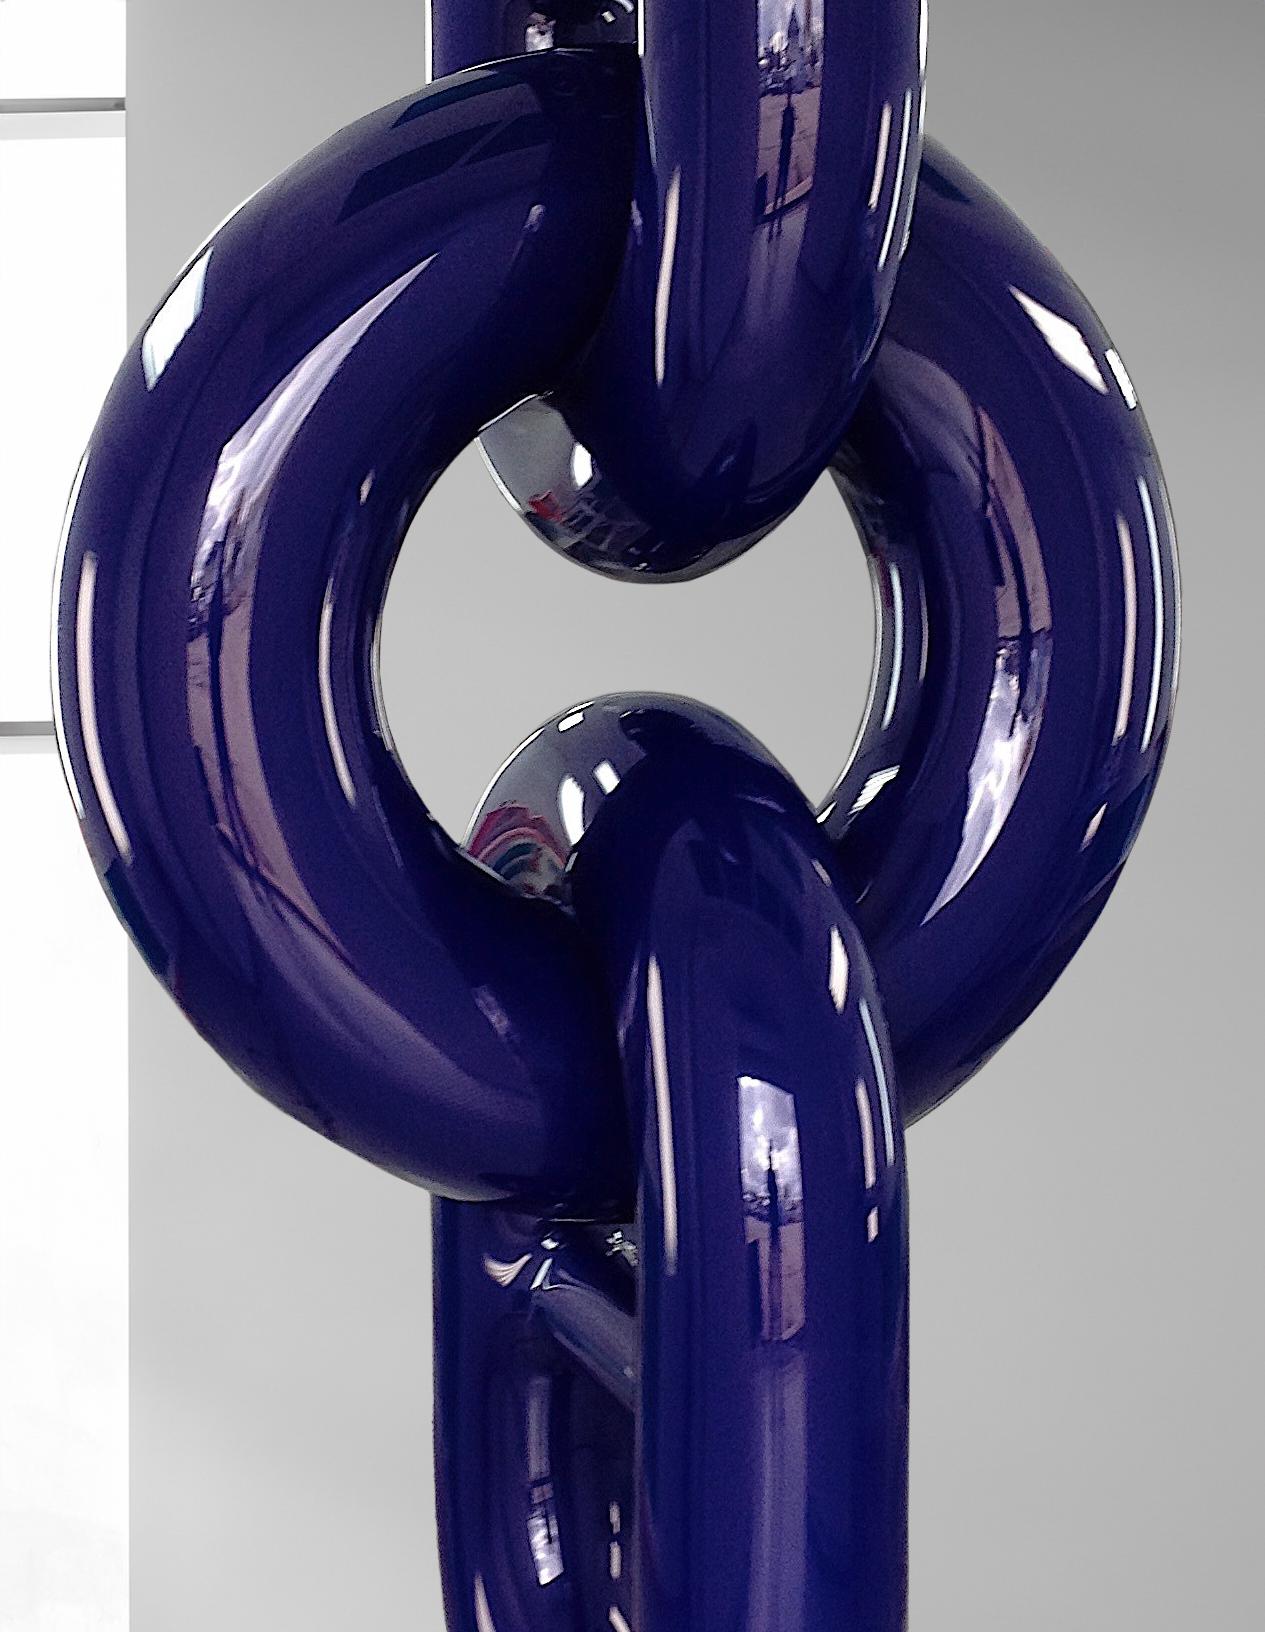 Blue Chain - polished, abstract, painted stainless steel, outdoor sculpture - Sculpture by Alexander Caldwell